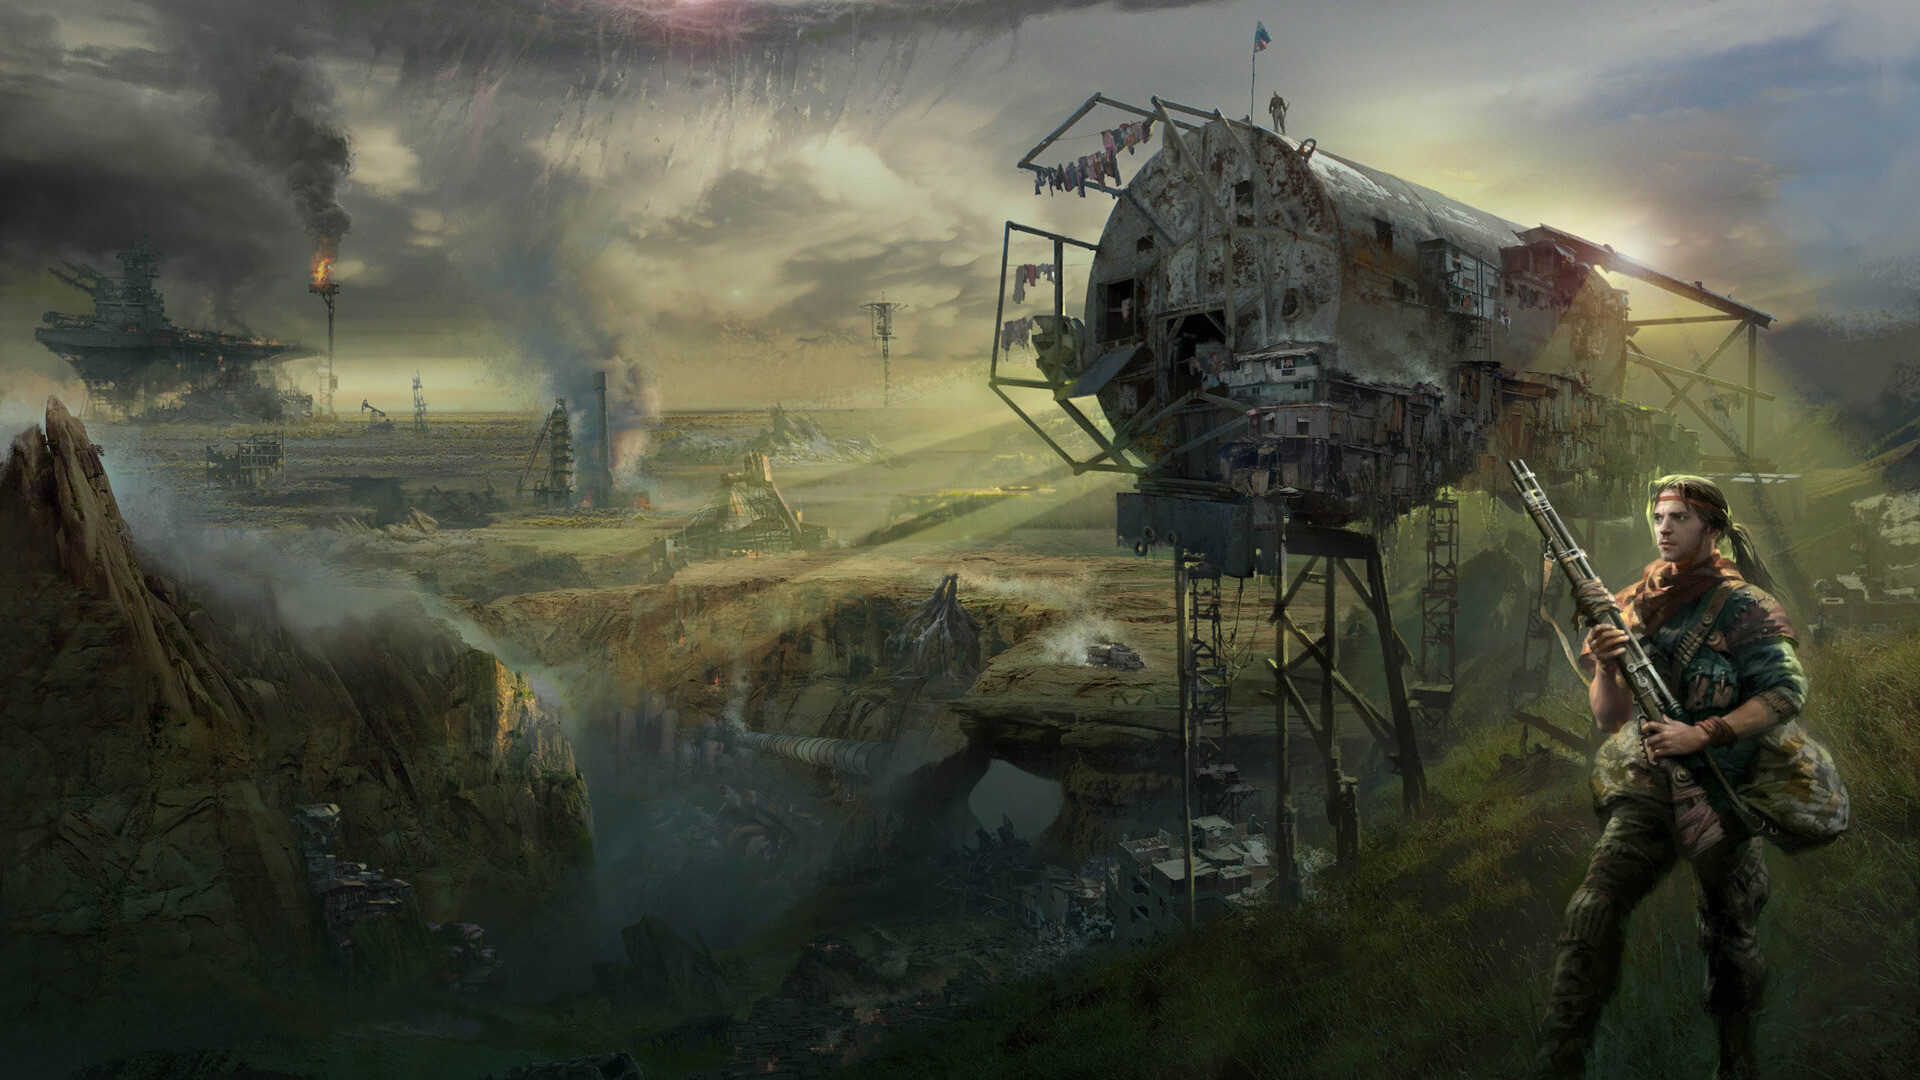 Post-apocalypse: The end of human civilization, Science fiction. 1920x1080 Full HD Wallpaper.